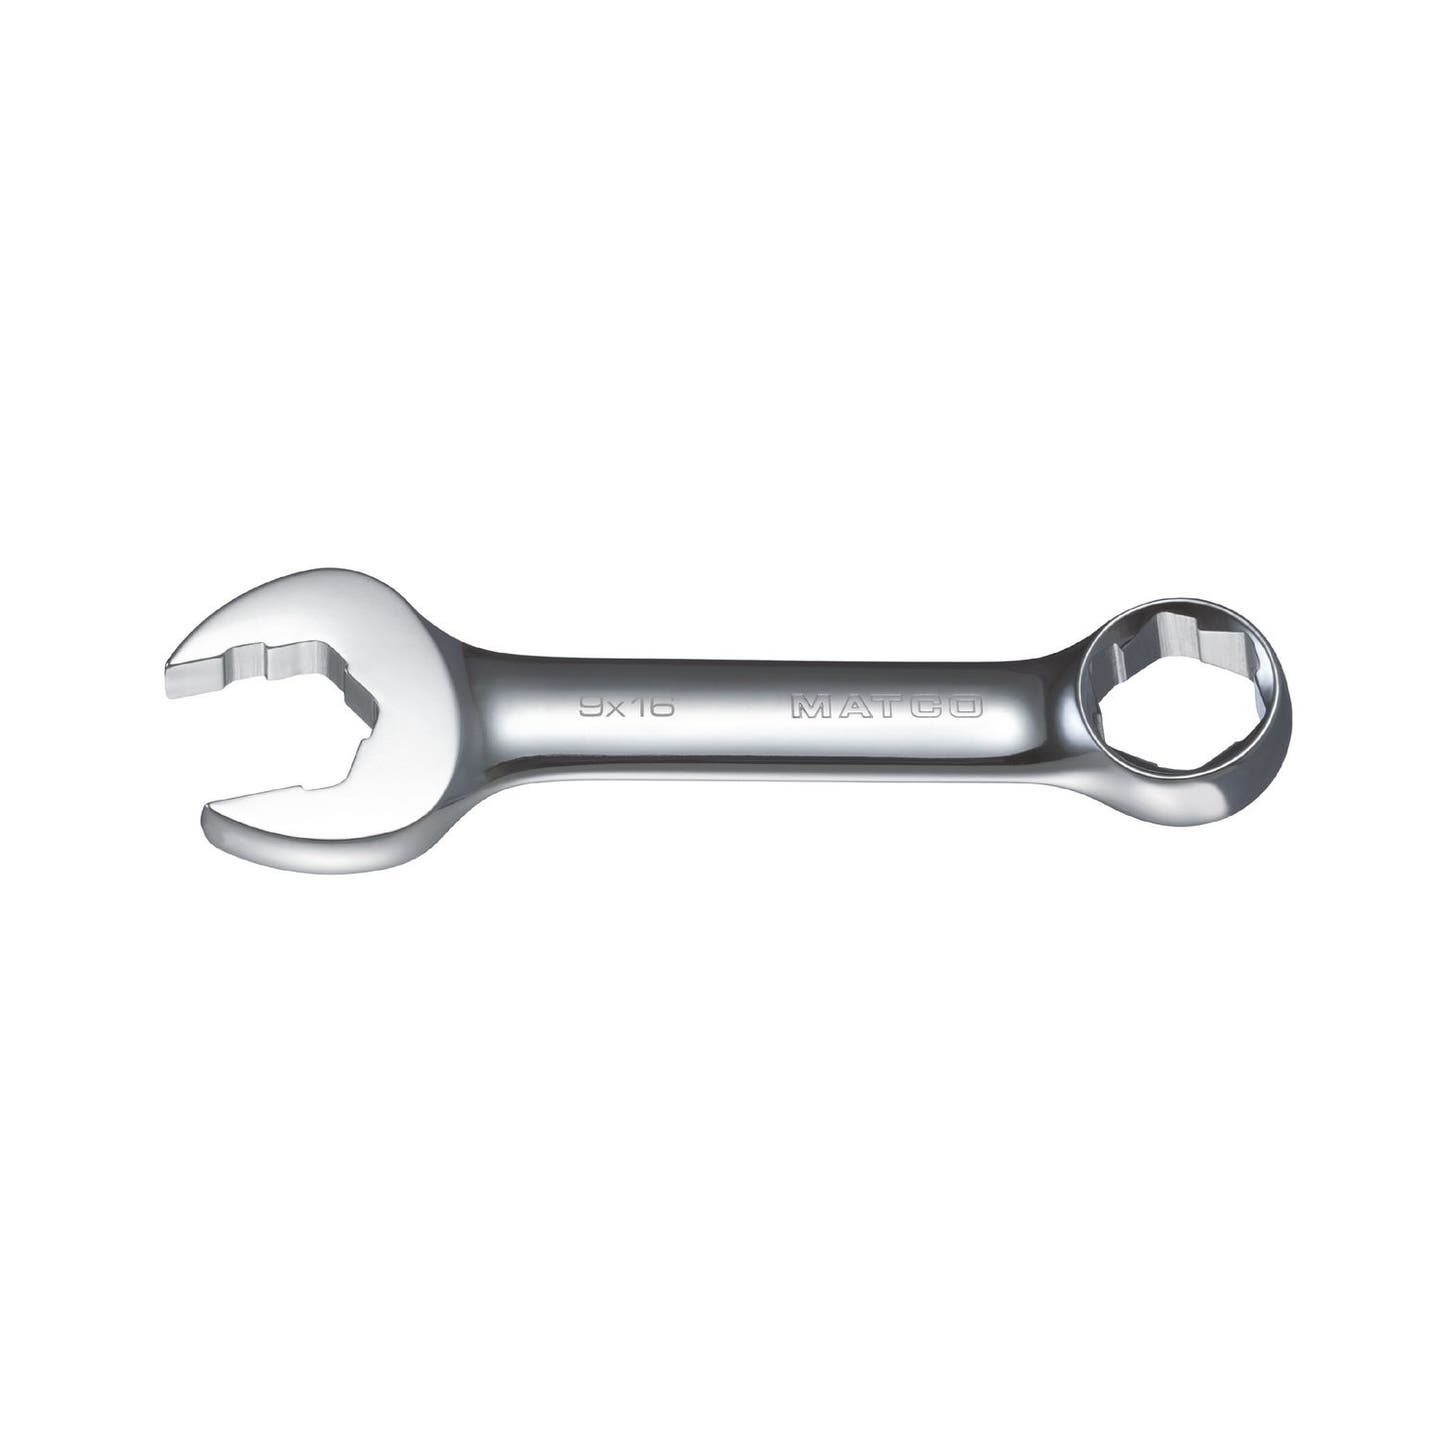 9/16" STUBBY SAE HEX GRIP WRENCH